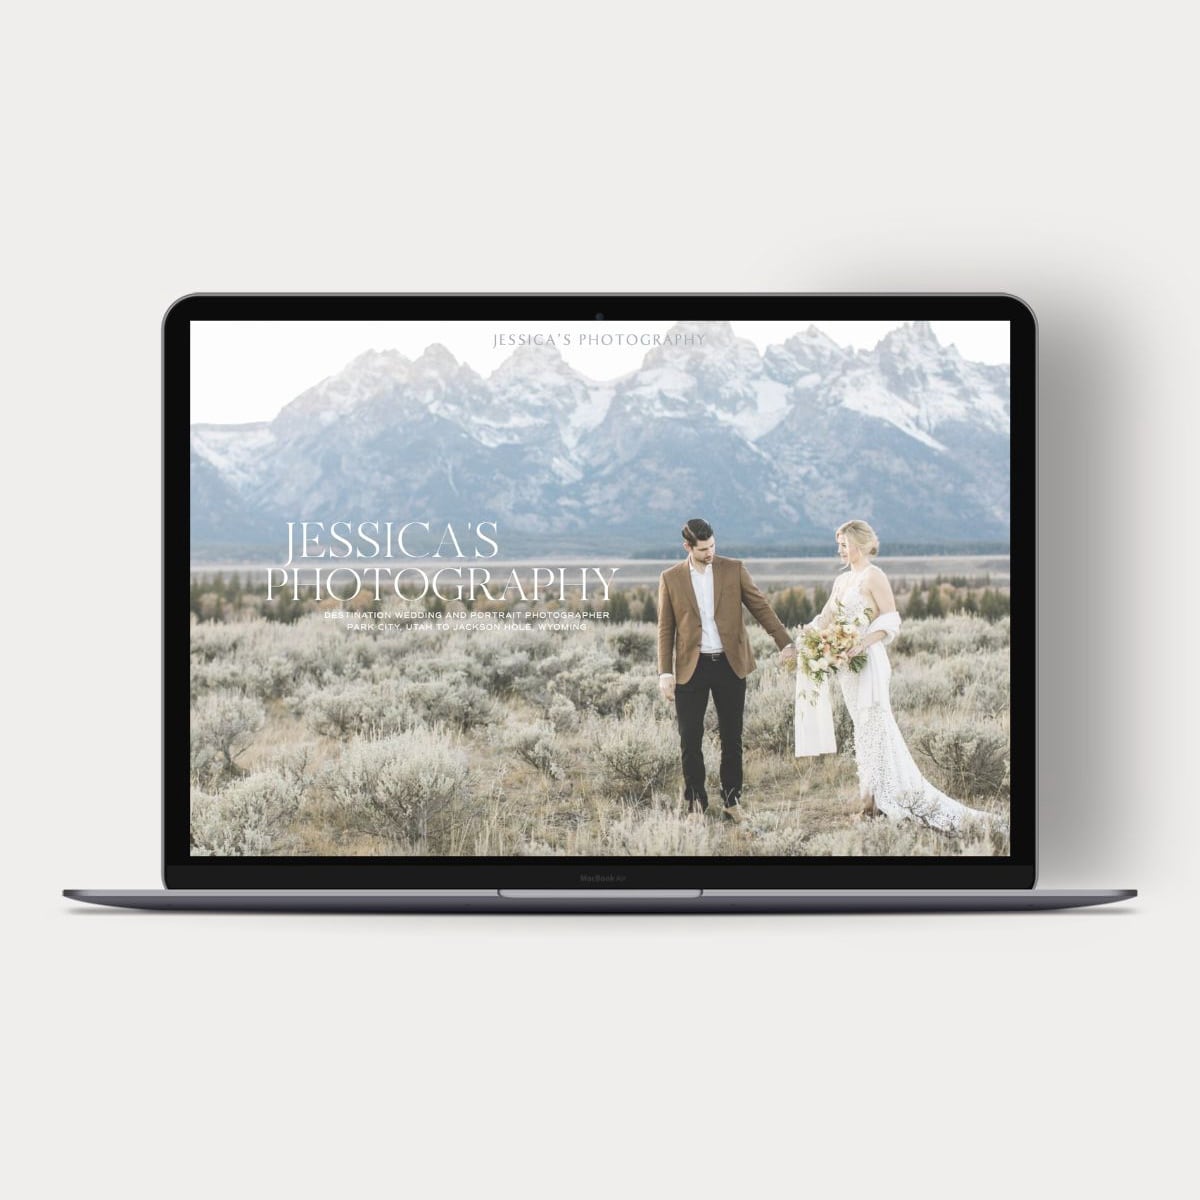 Photo of a laptop showing a new website for a wedding photographer